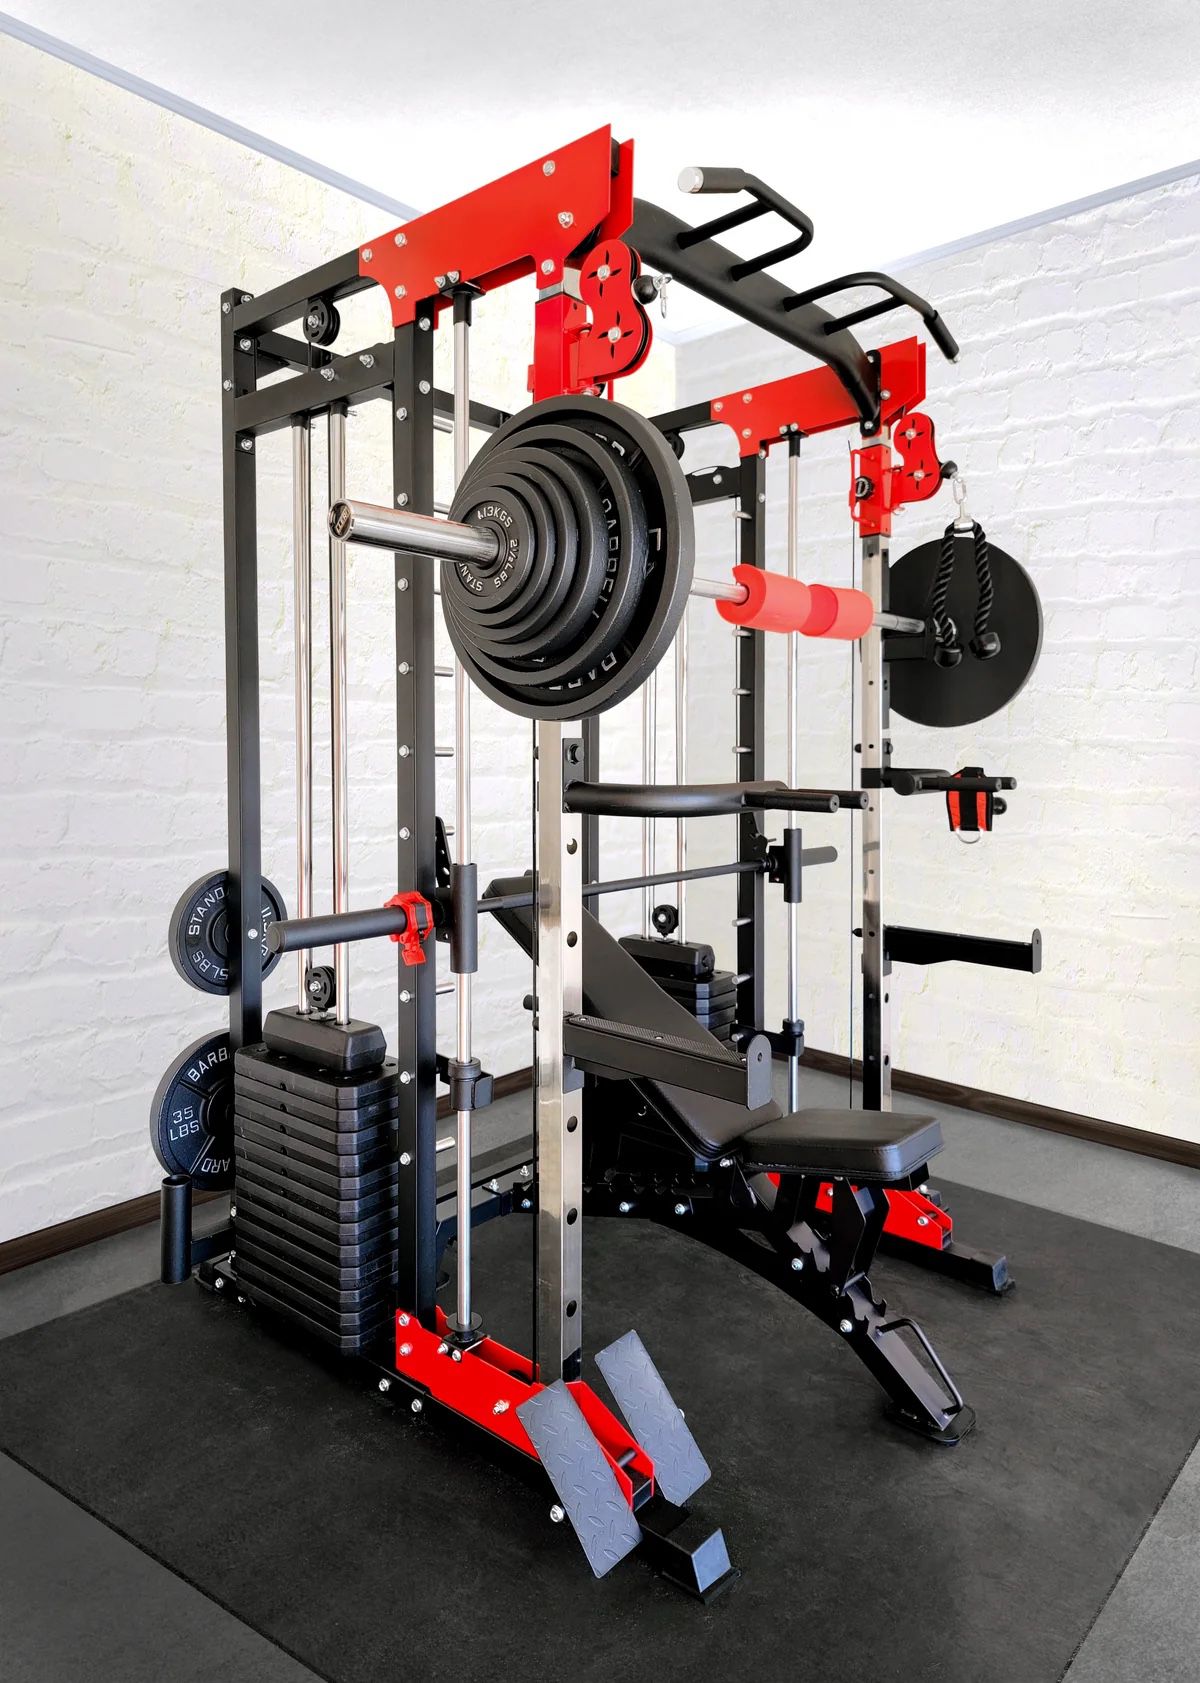 Brand New - Weights & Bench INCLUDED. FREE Delivery - LLERO A60 Home Gym. Smith Machine & Functional Trainer